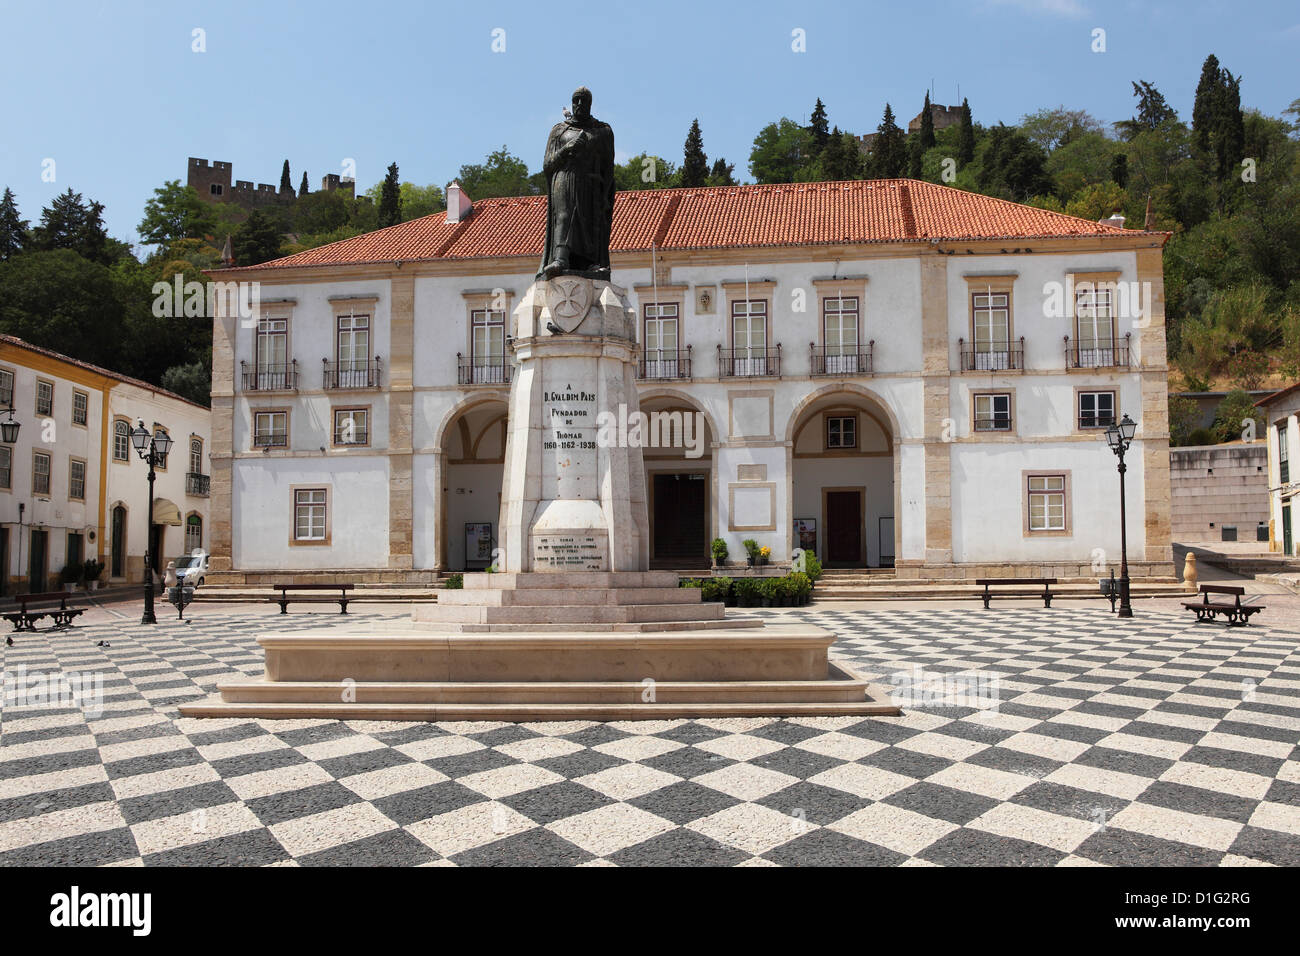 Statue of Gualdim Pais, the city founder, by the town hall, on the Praca de Republica, Tomar, Ribatejo, Portugal, Europe Stock Photo